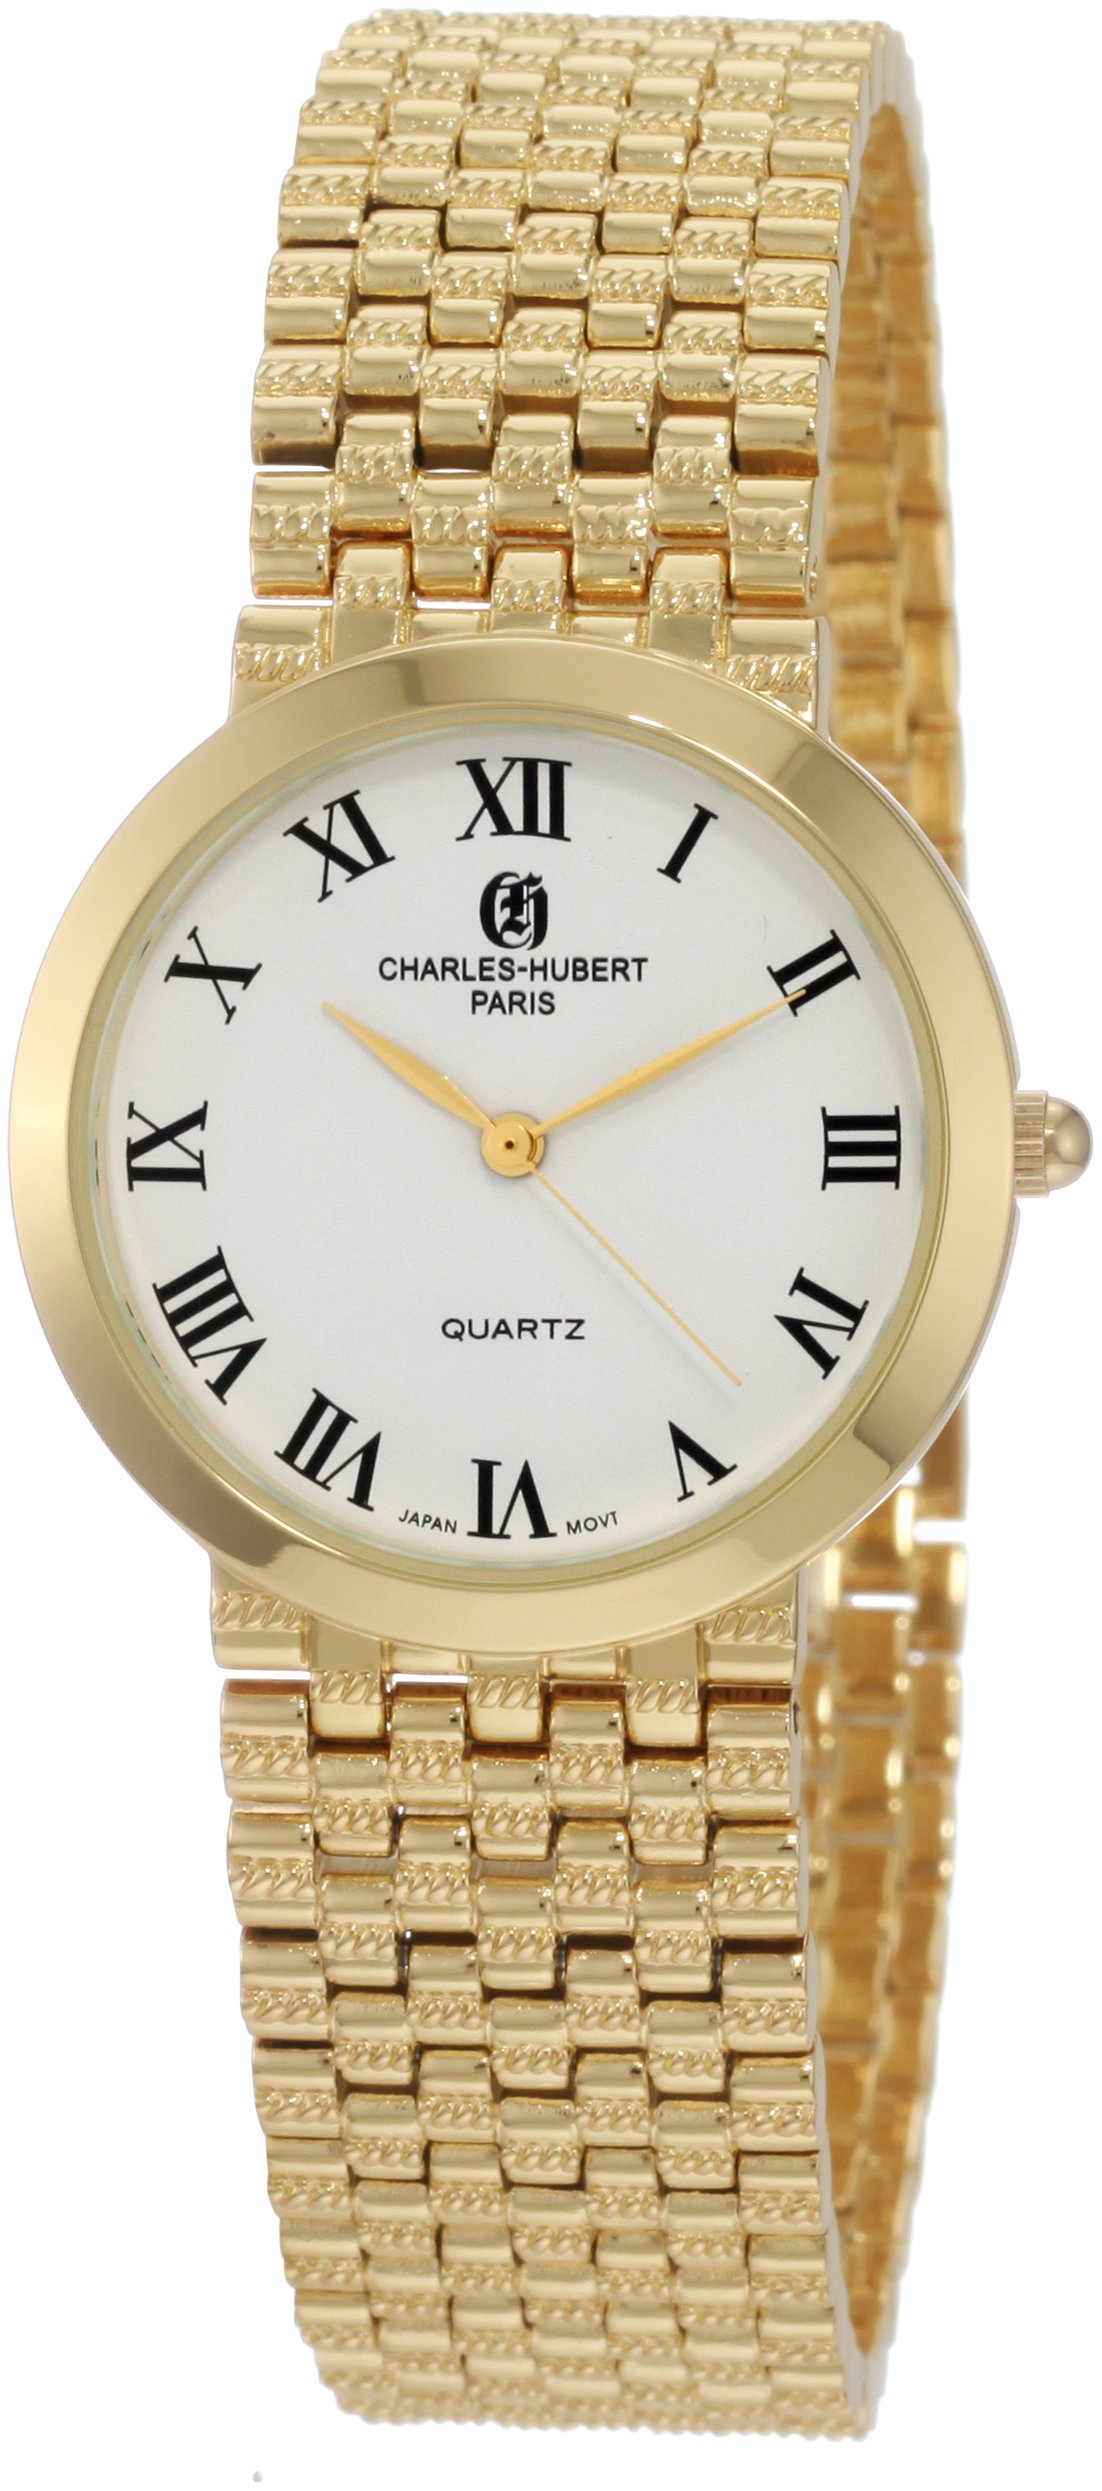 Charles-Hubert, Paris Men's 3795 Classic Collection Gold-Plated Watch